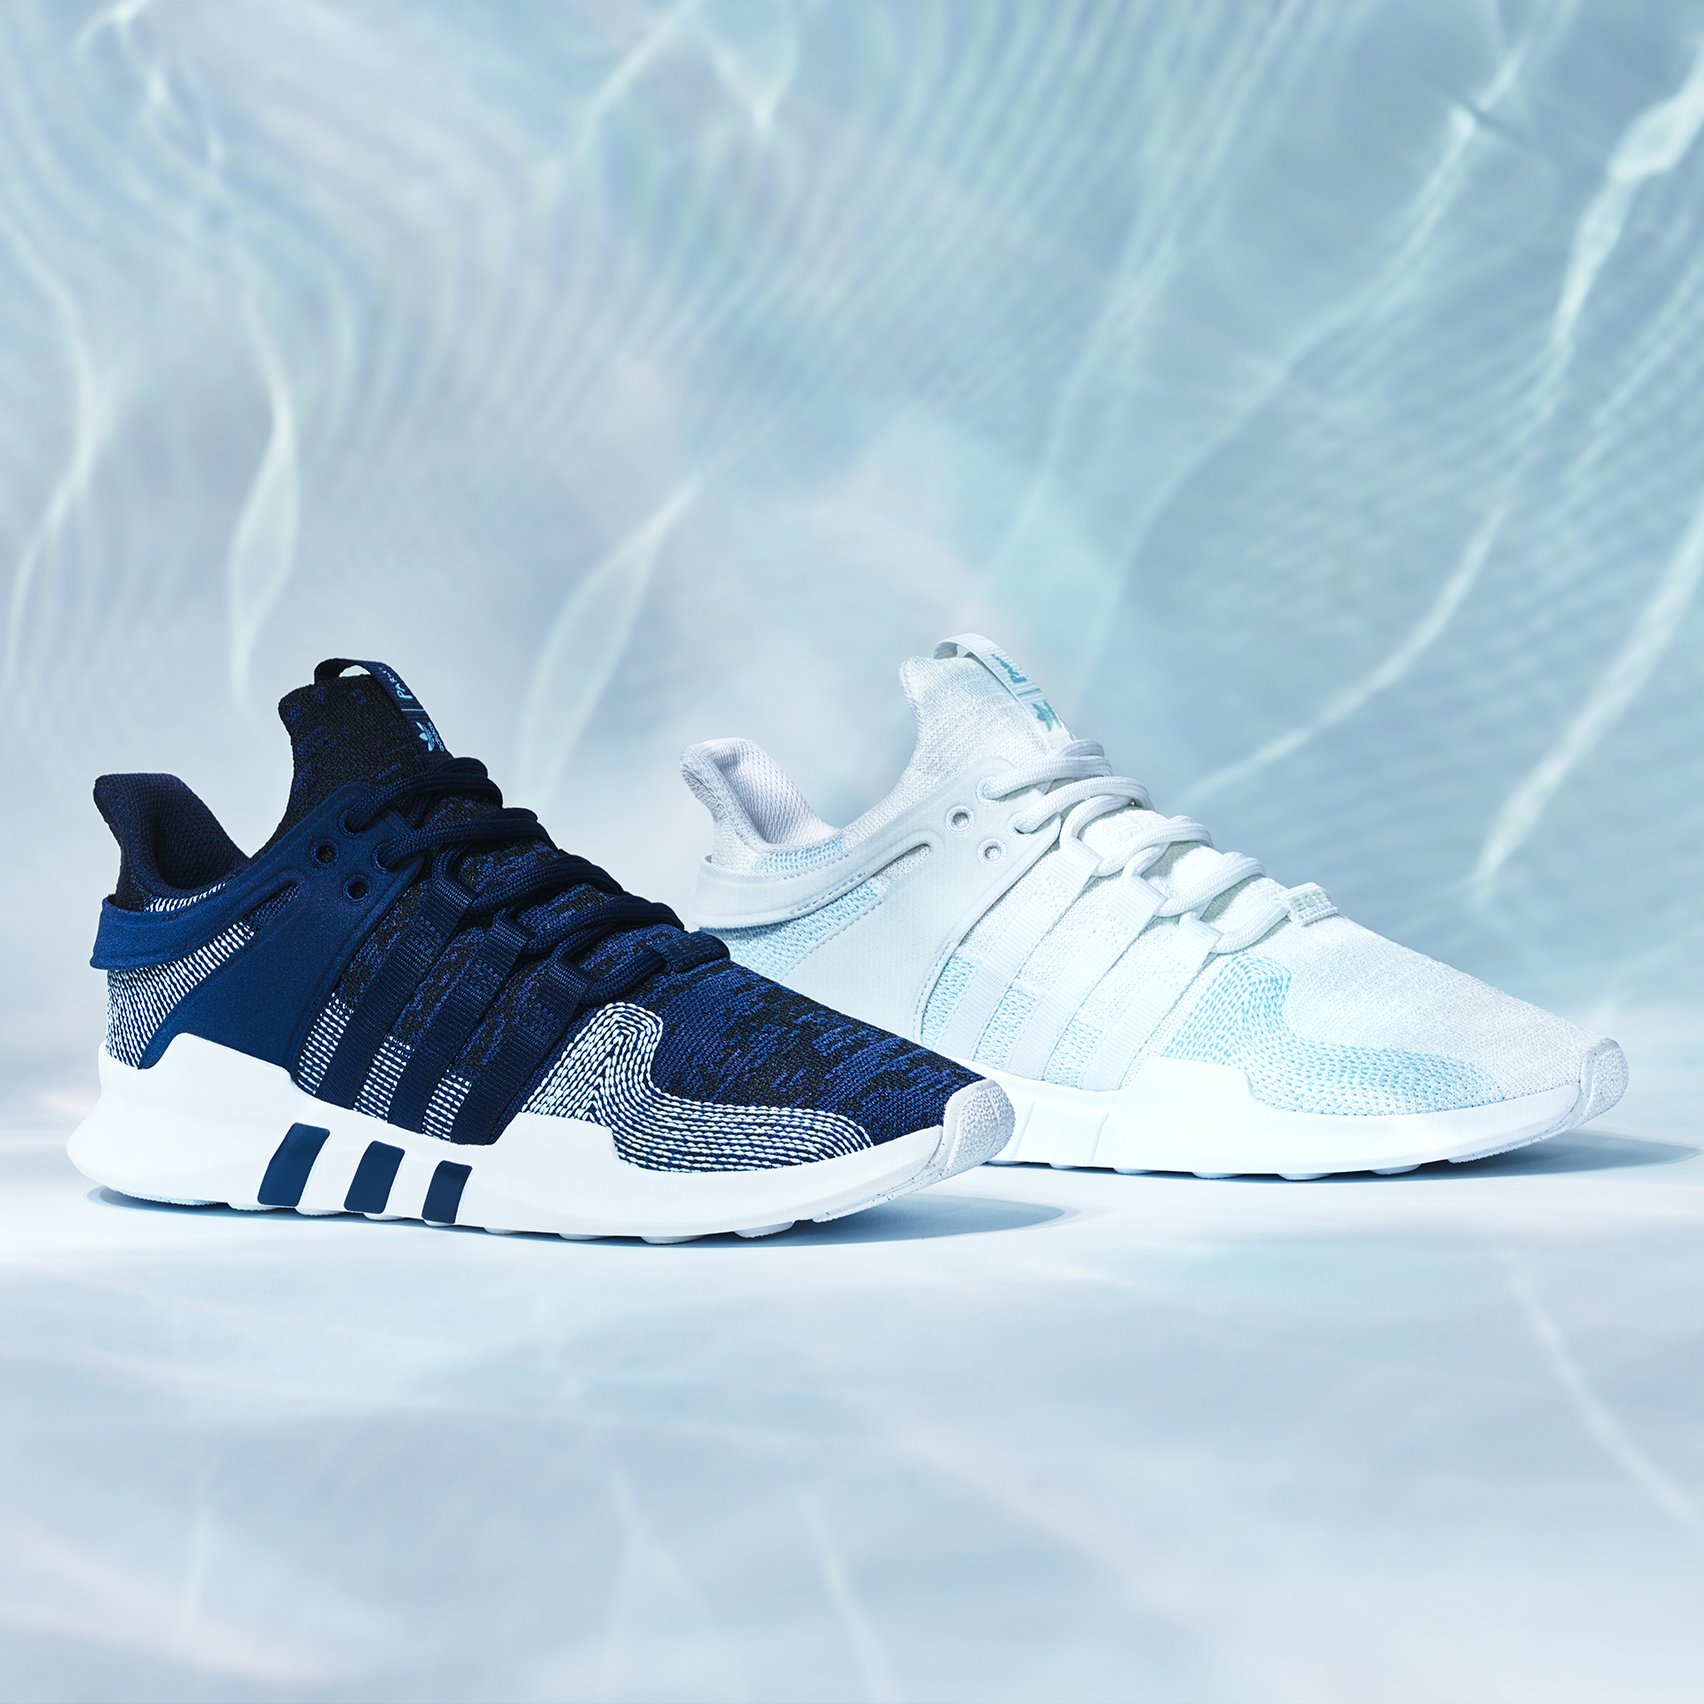 adidas en Twitter: "The EQT Support ADV; using Parley Ocean Plastic and @Parleyxxx unite to turn a problem into progress. #adidasParley https://t.co/0yB6B8P6aW" / Twitter